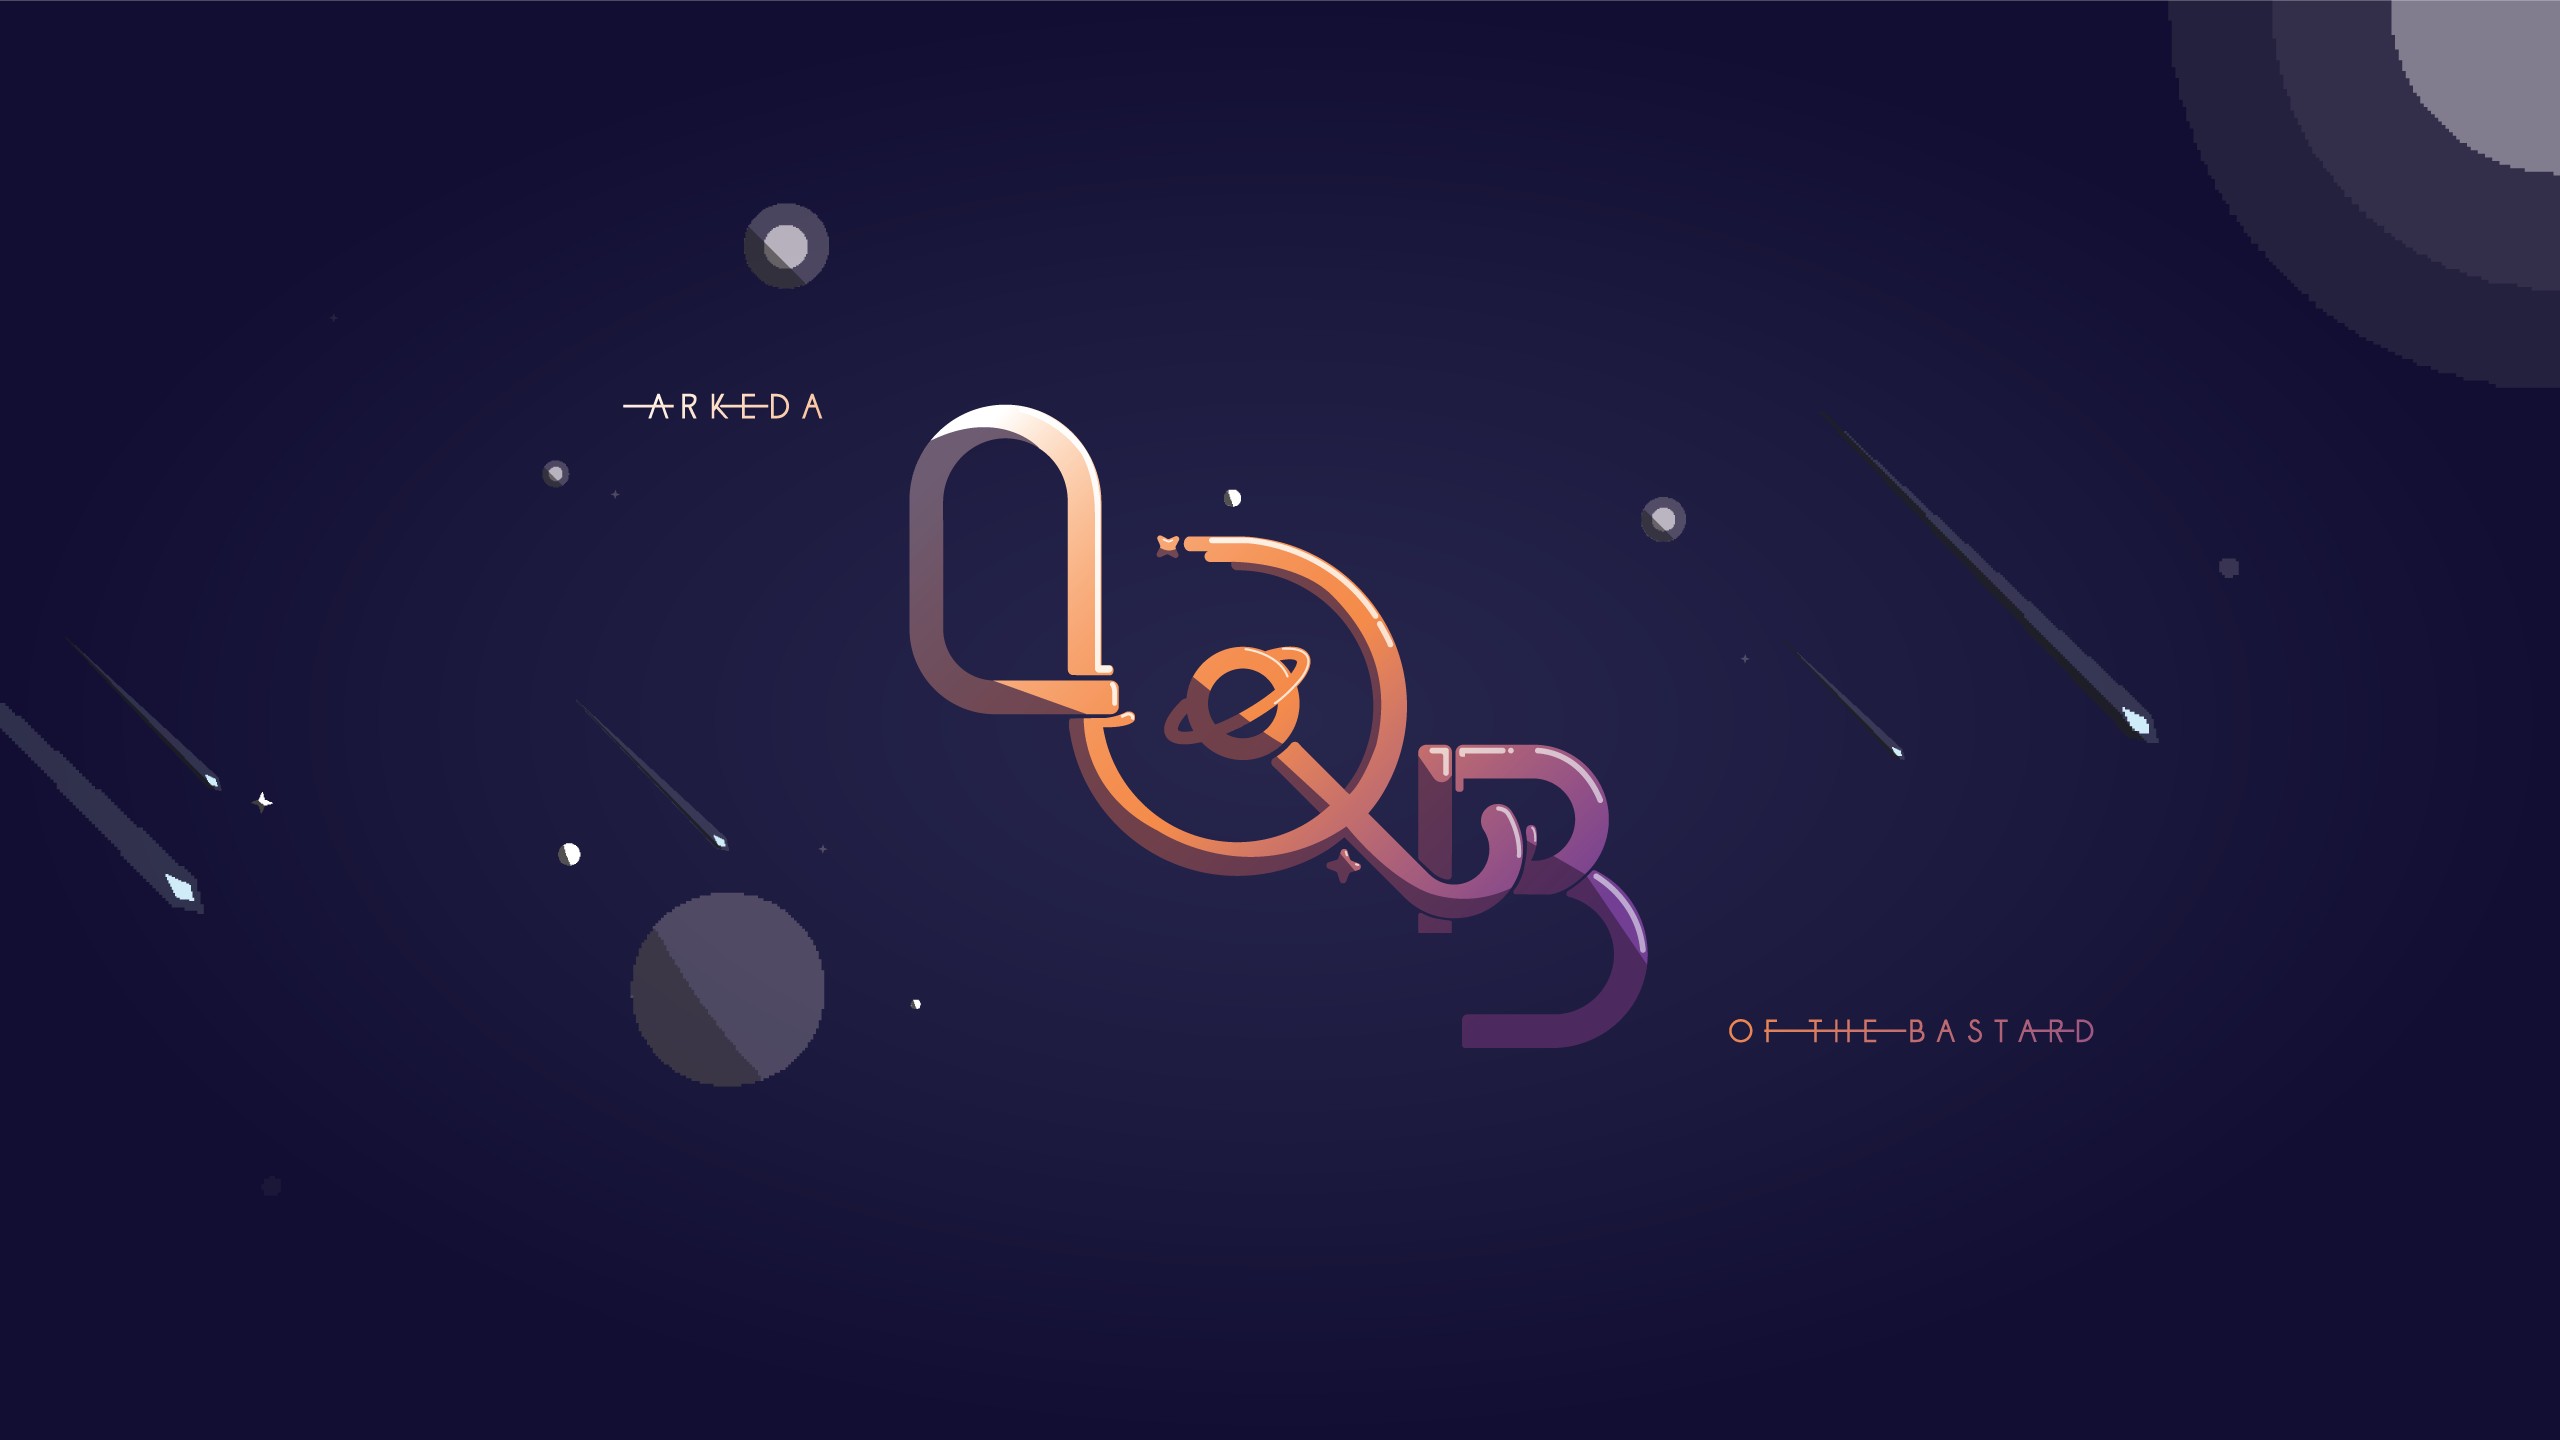 musician, Arkeda of the bastard, Typography, Typographic, Space, Logotype, Illustration, Electronic music Wallpaper